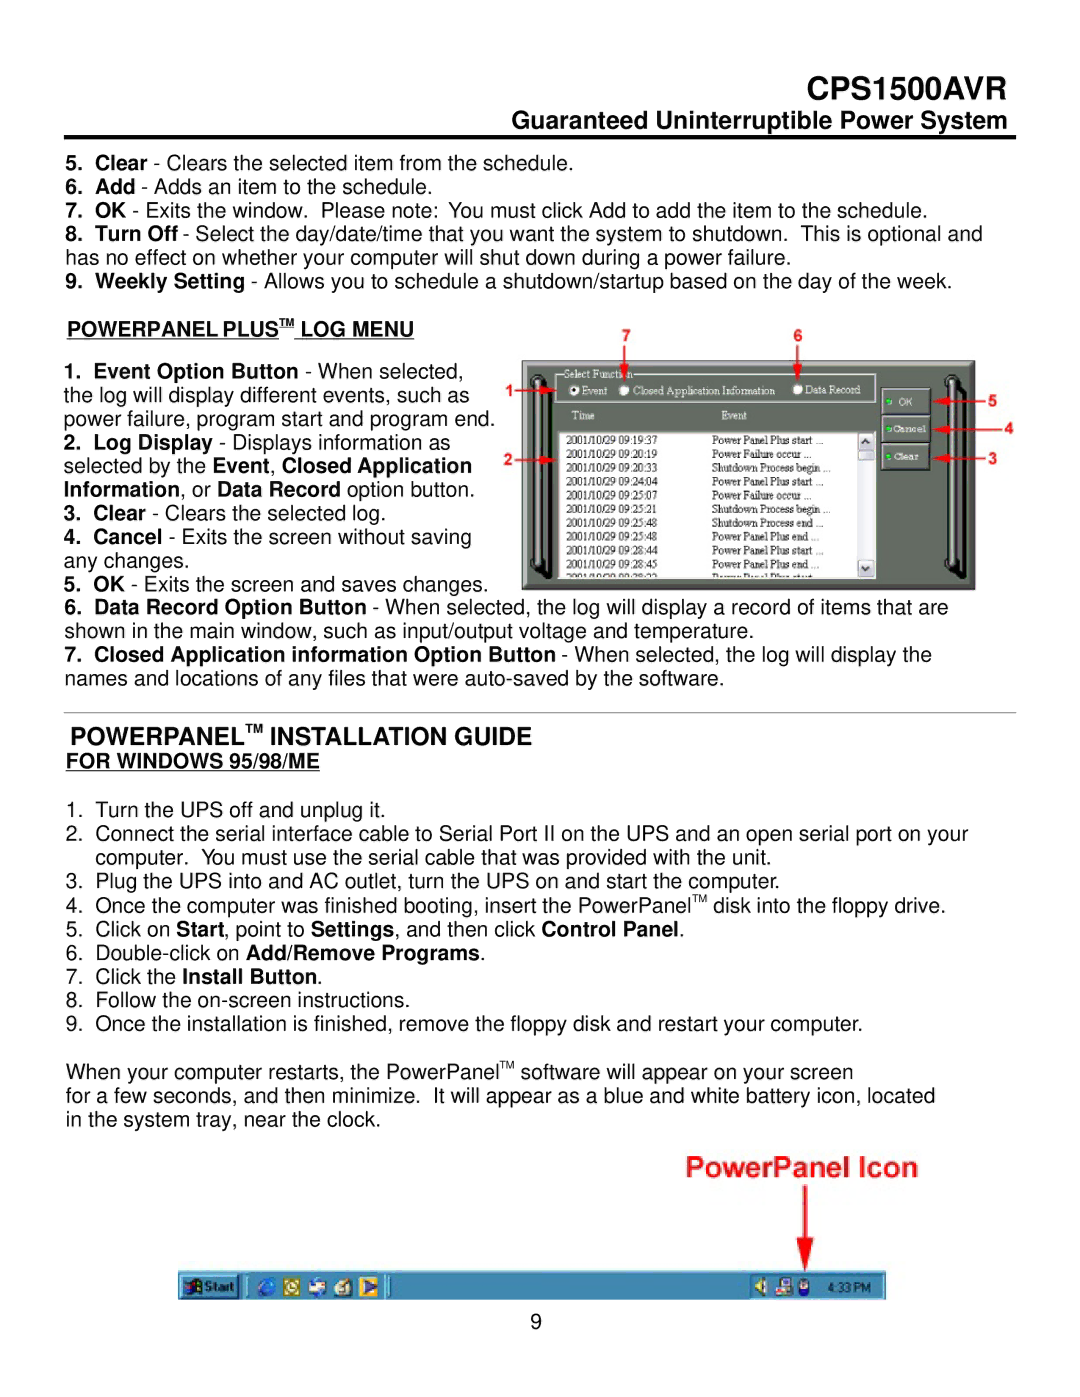 CyberPower Systems CPS1500AVR user manual Powerpaneltm Installation Guide, Powerpanel Plustm LOG Menu, For Windows 95/98/ME 